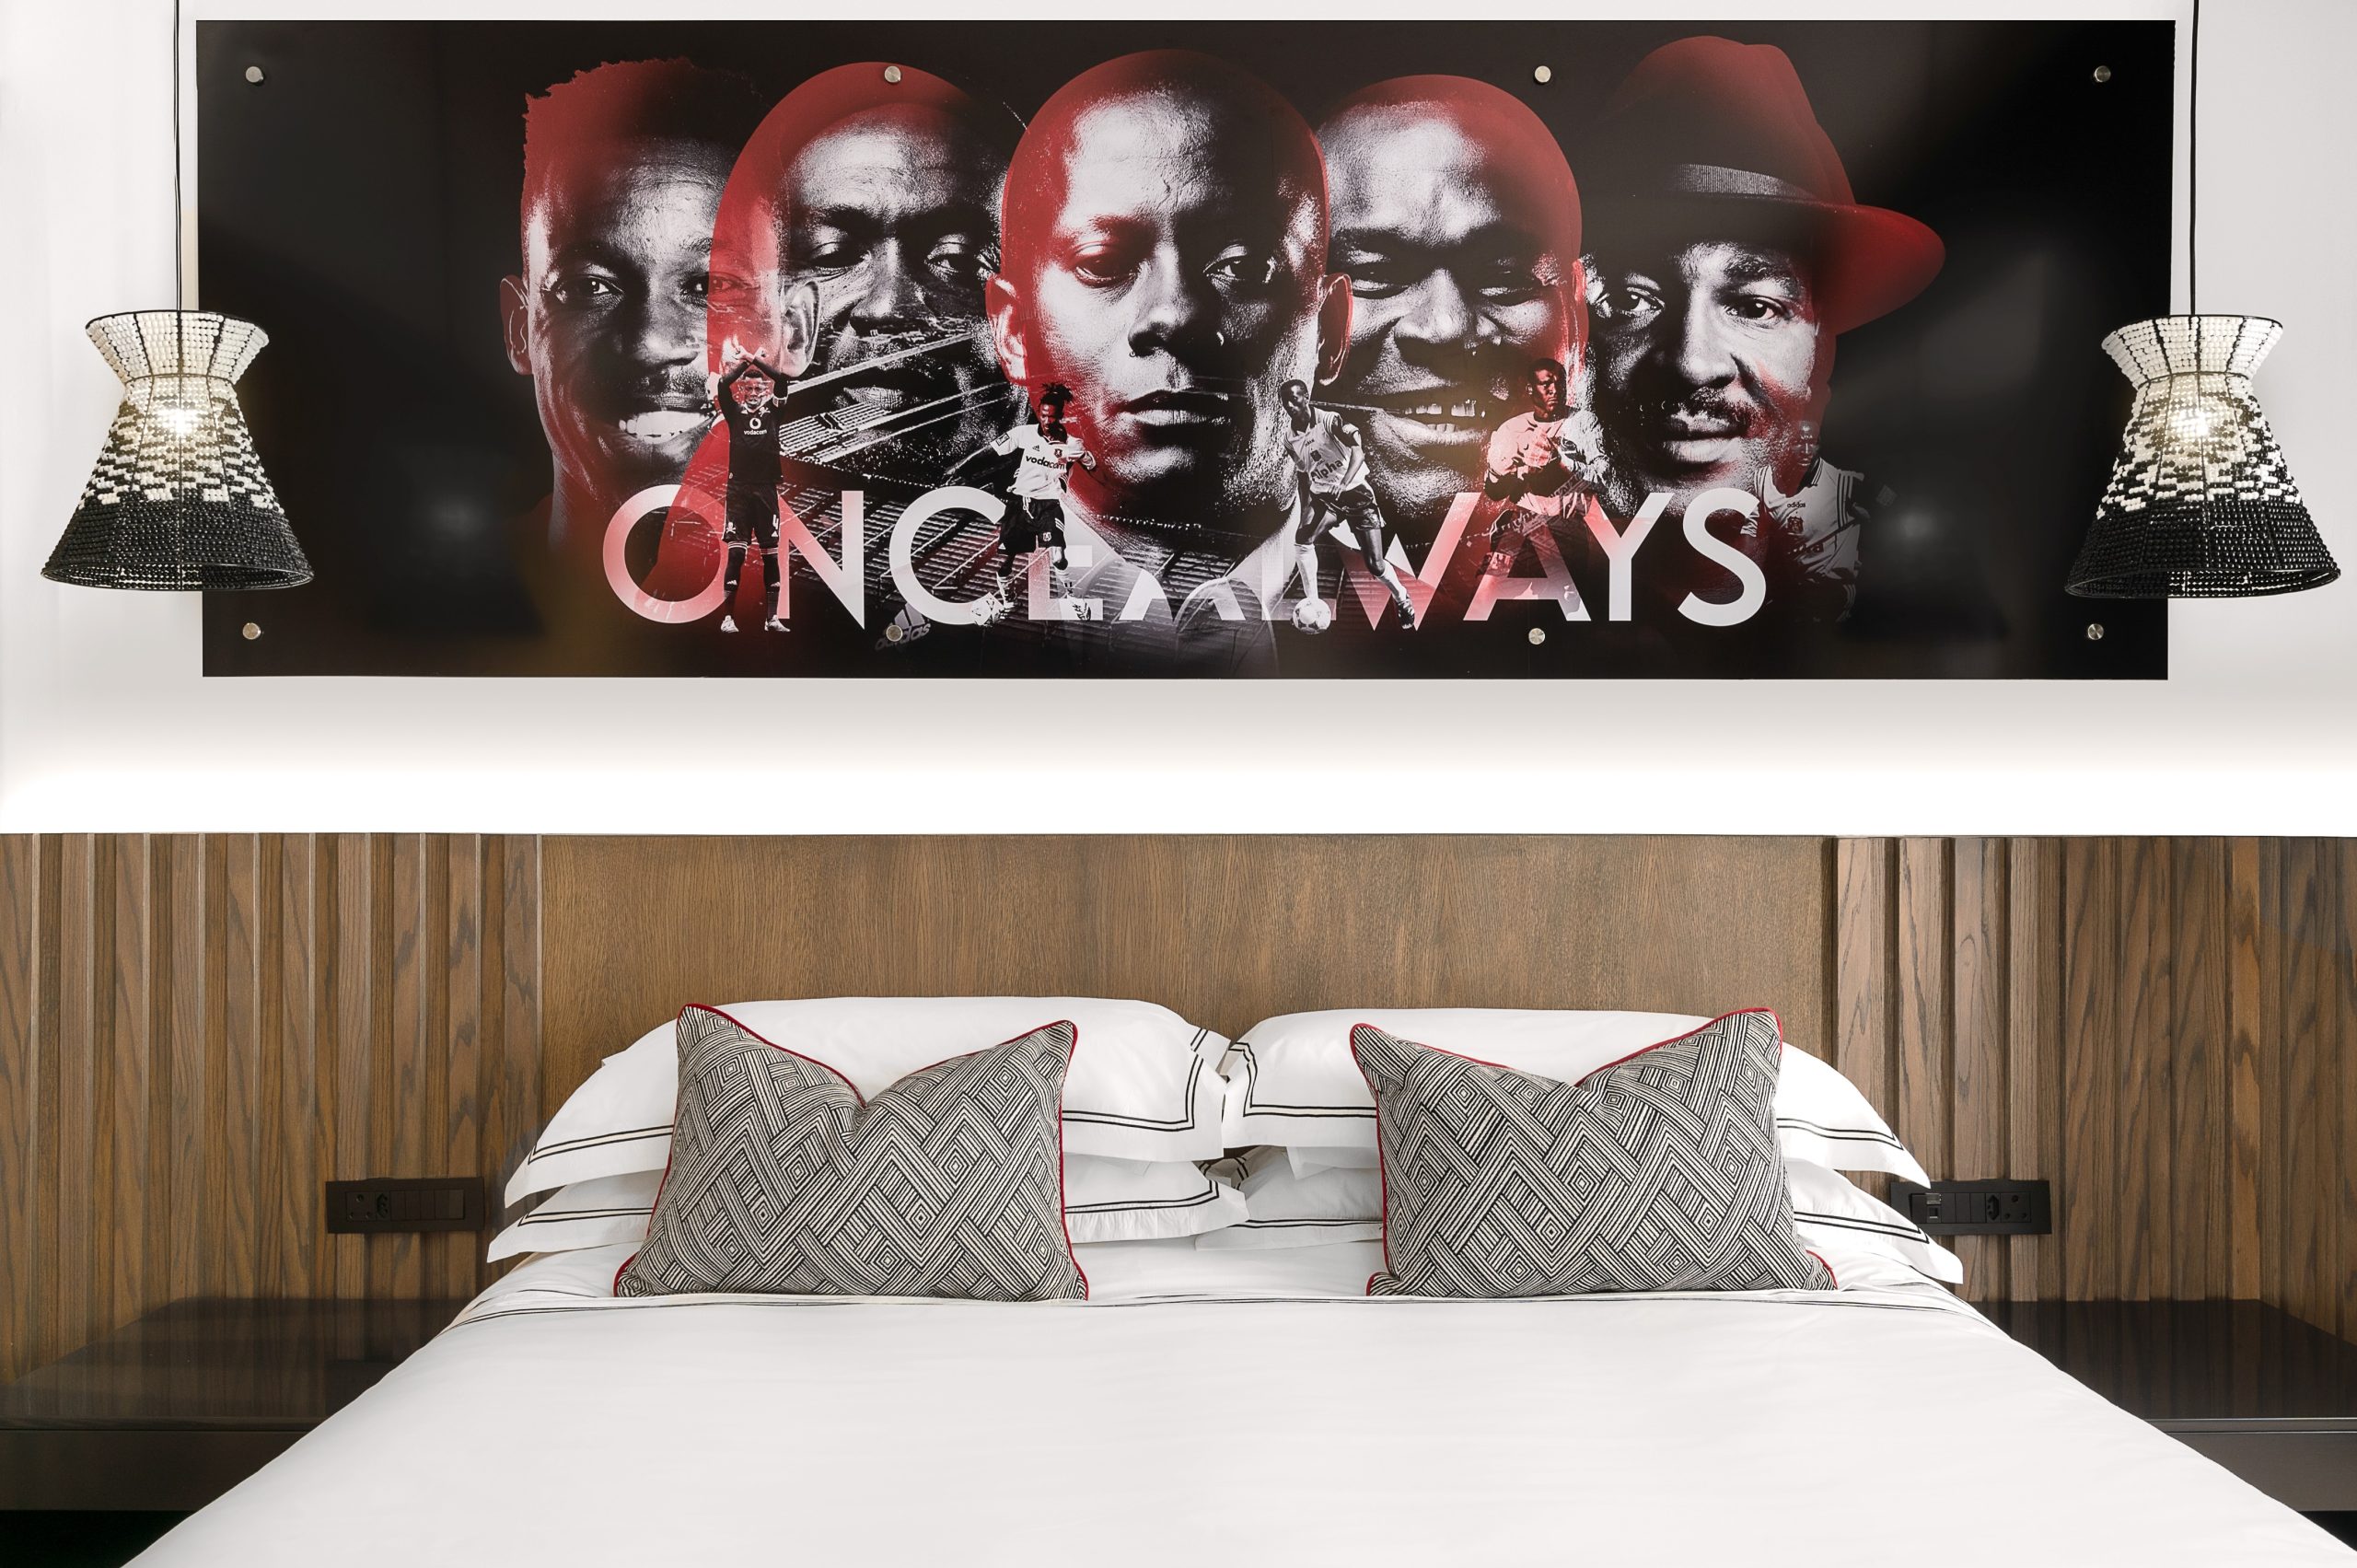 Football fans can now stay in an Orlando Pirates themed hotel room in Joburg